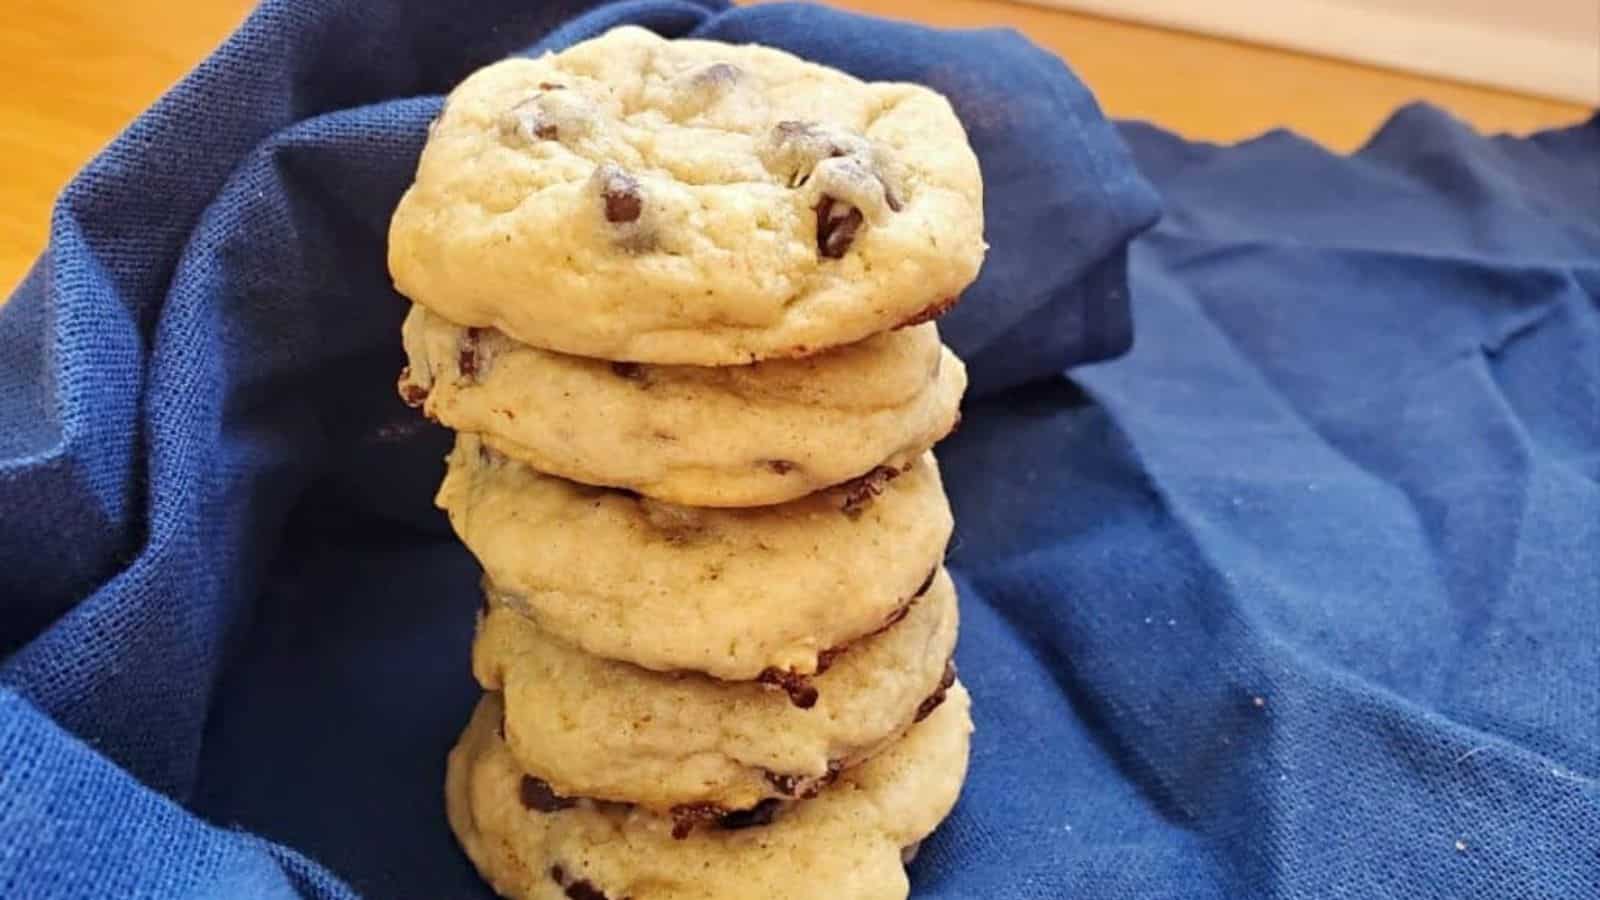 Image shows A stack of sourdough chocolate chip cookies on a blue cloth.